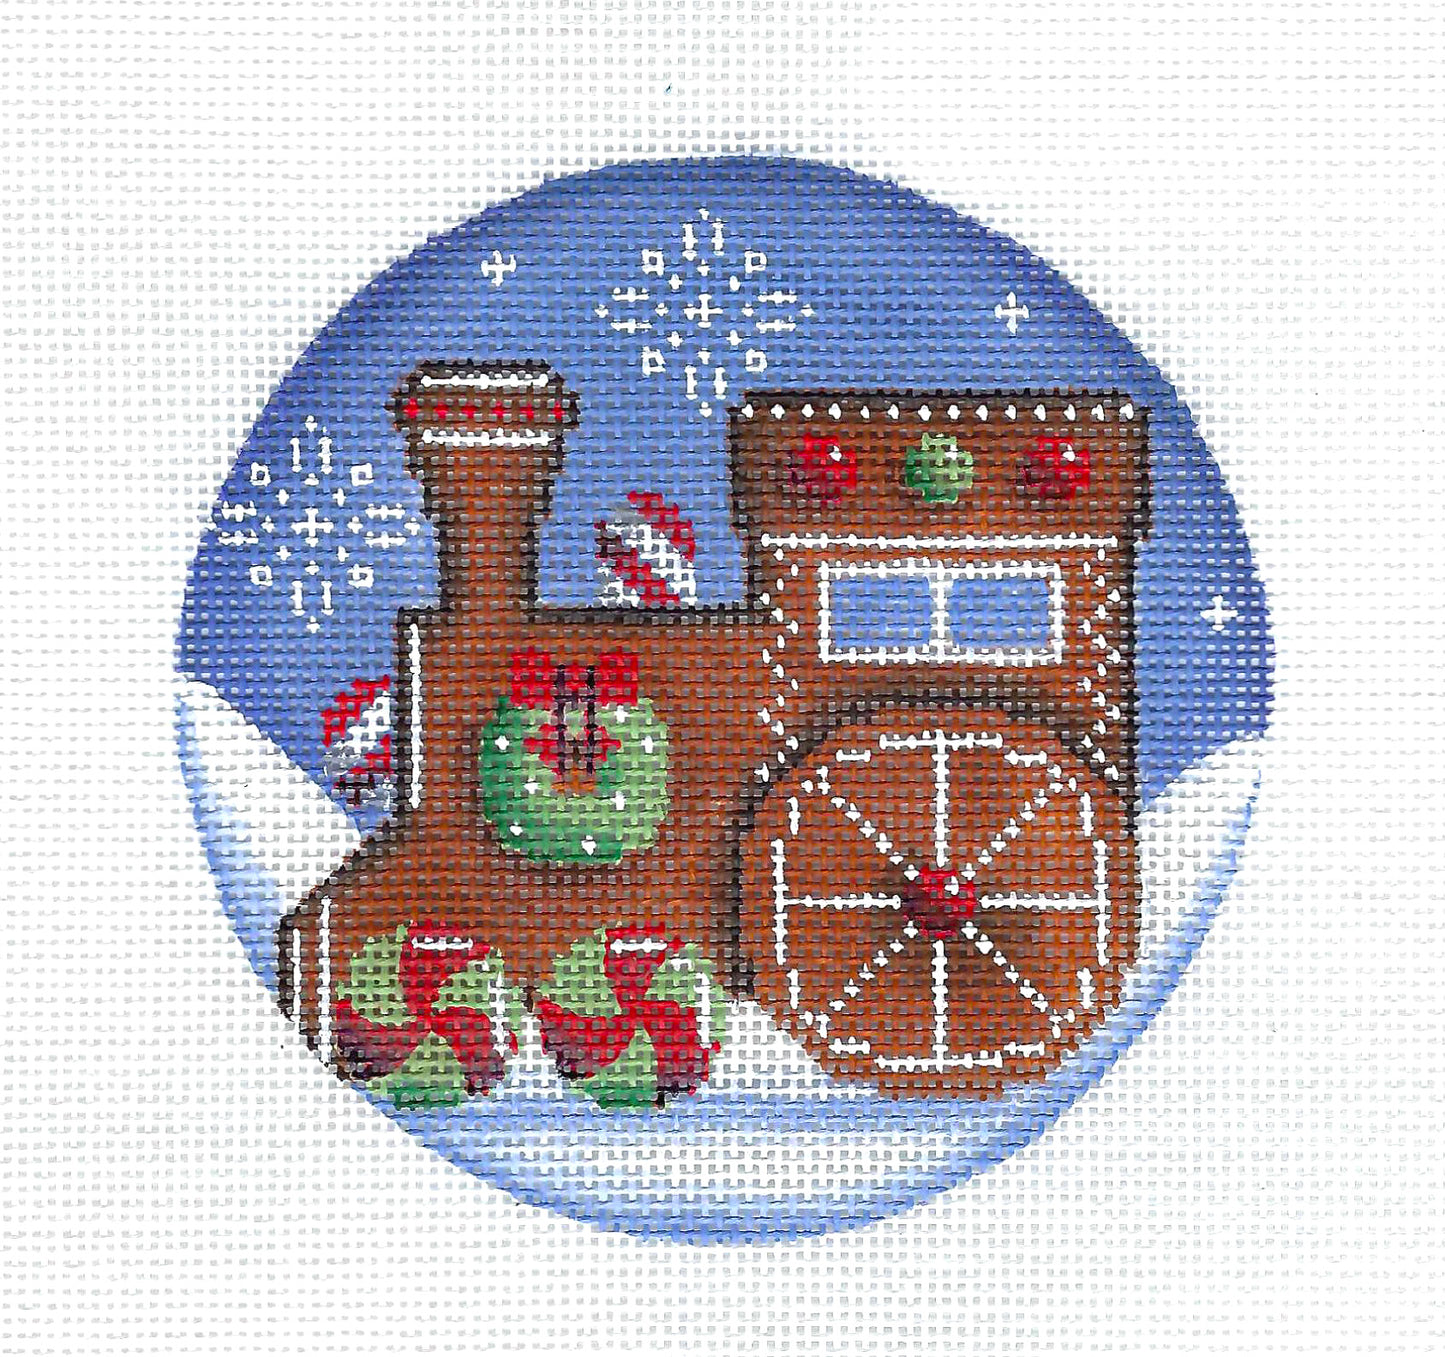 Christmas ~ Gingerbread Train Engine Handpainted Needlepoint Canvas by Rebecca Wood